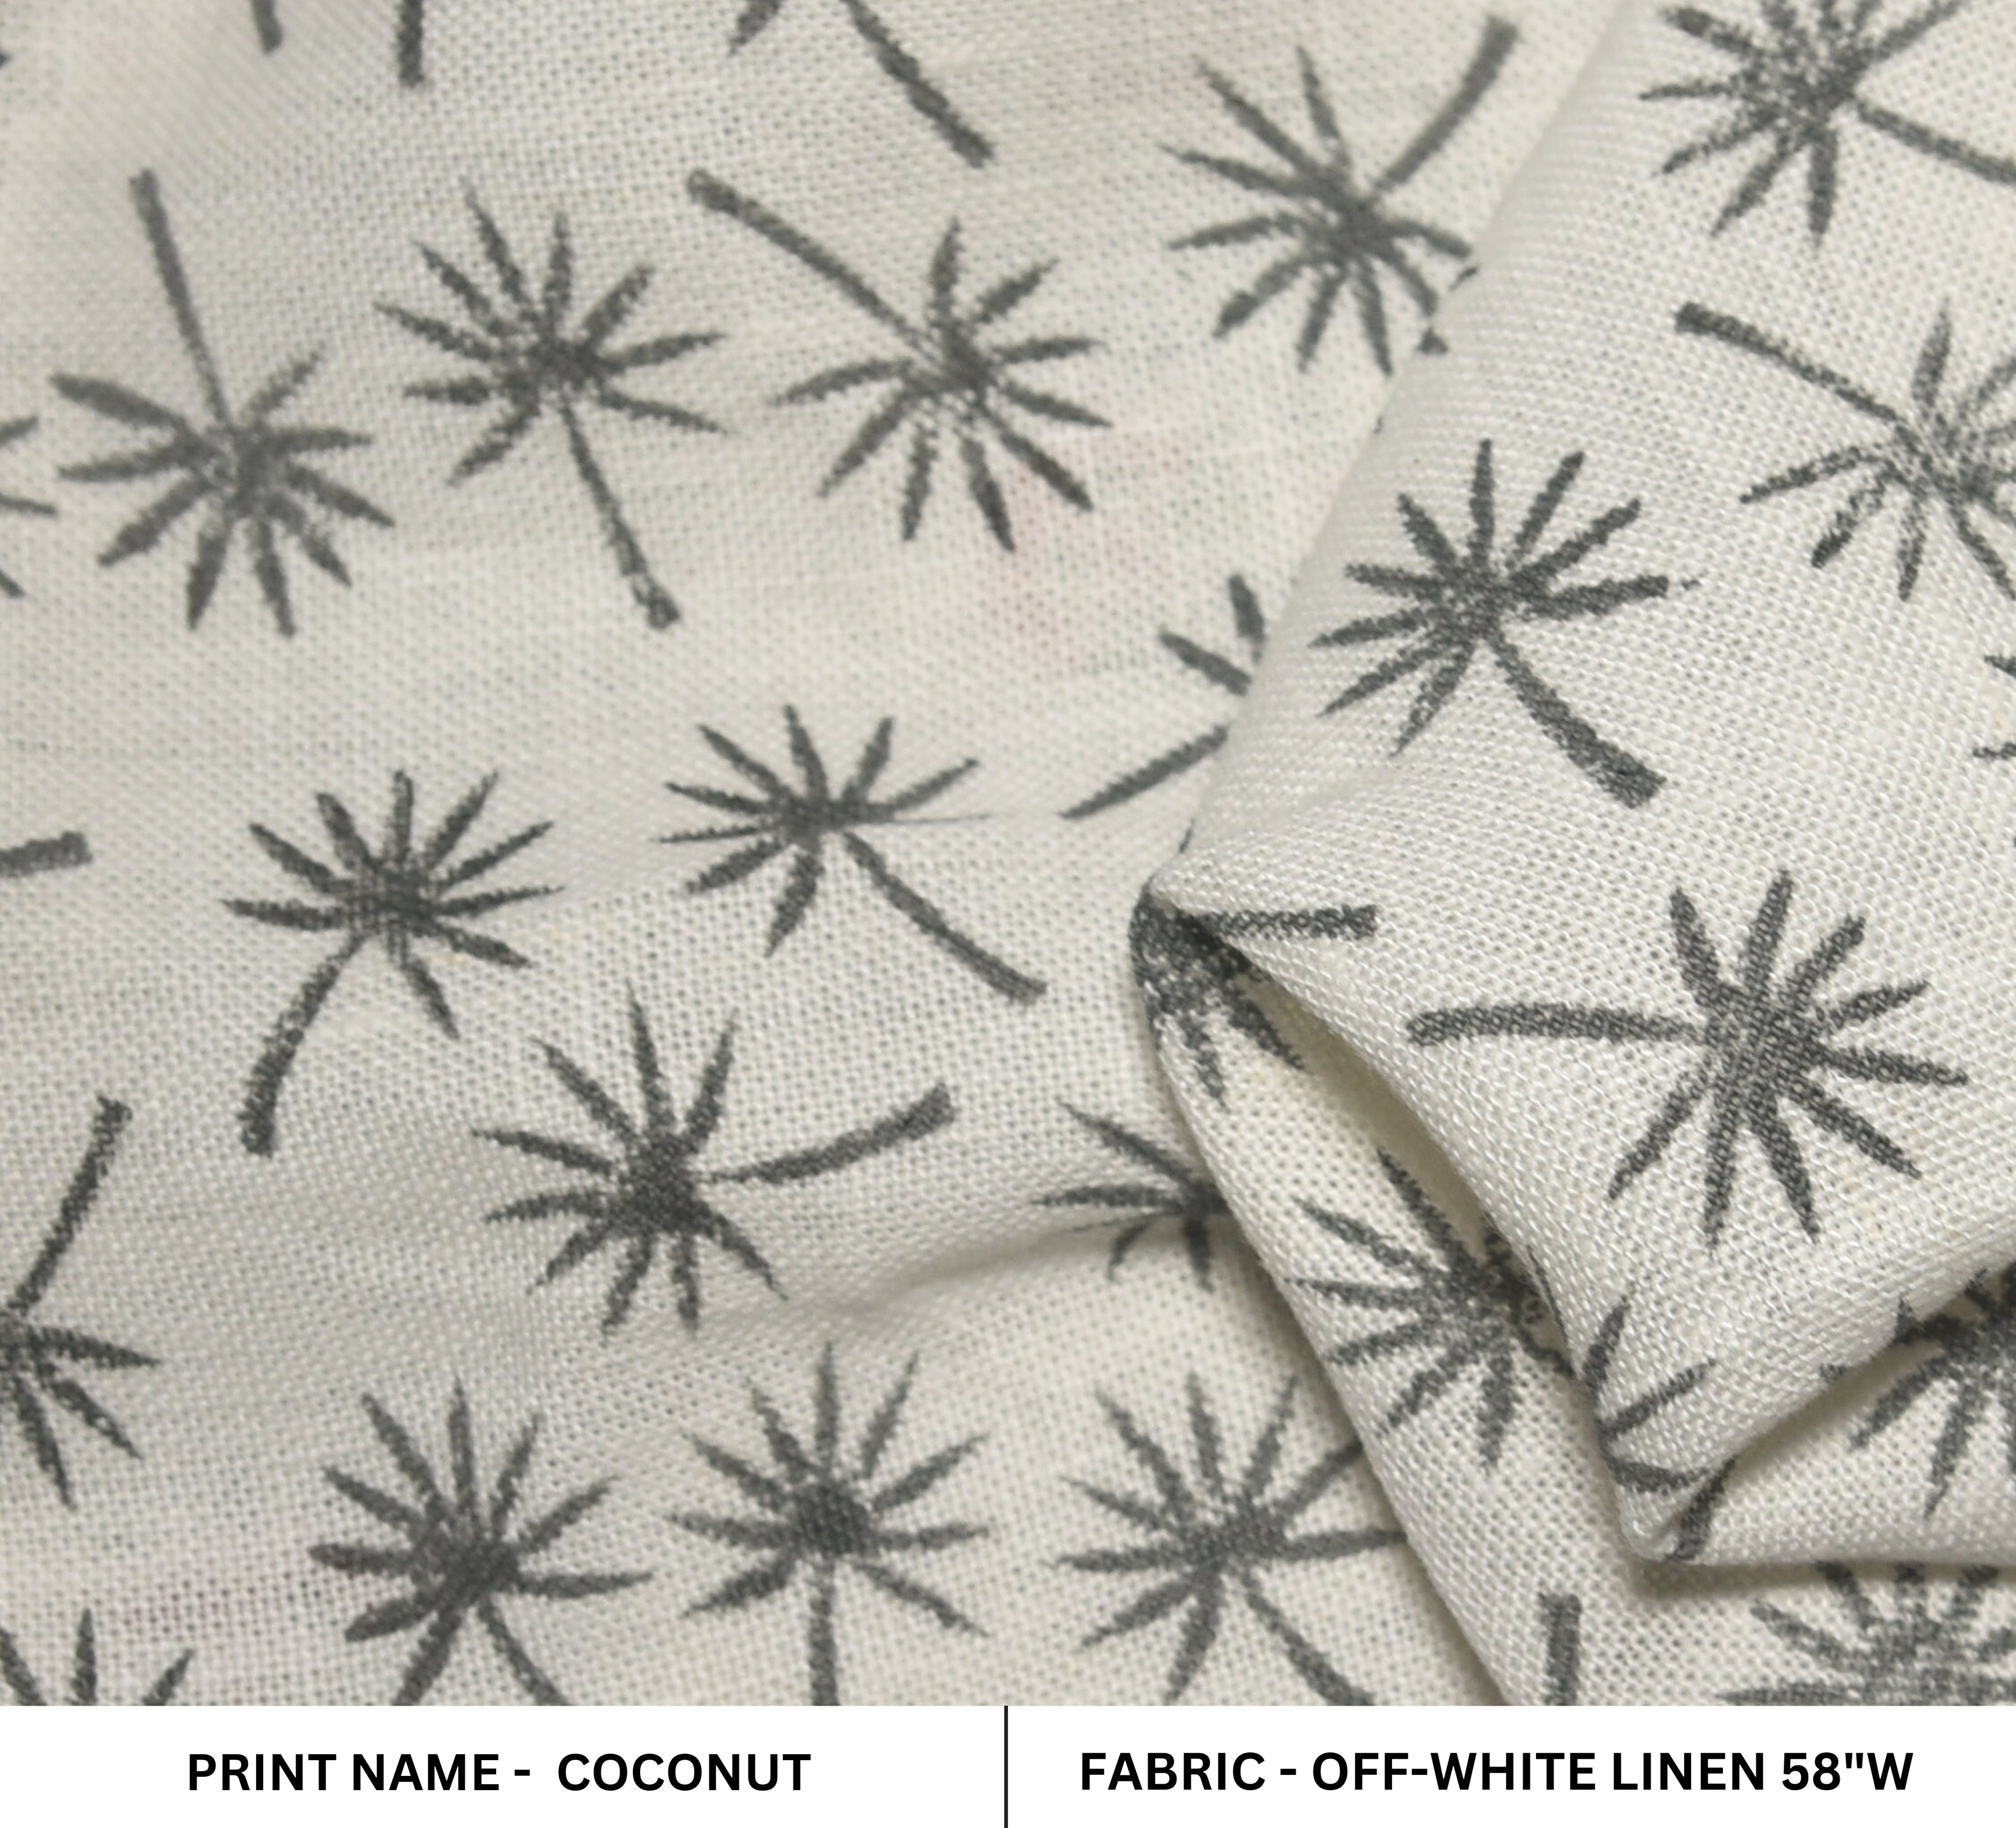 Coconut Tree  Most Popular Block Print Fabric In Summers  Best For Upholstery, Cushion Cover, Sofa/Chair Cover, And Other Crafts